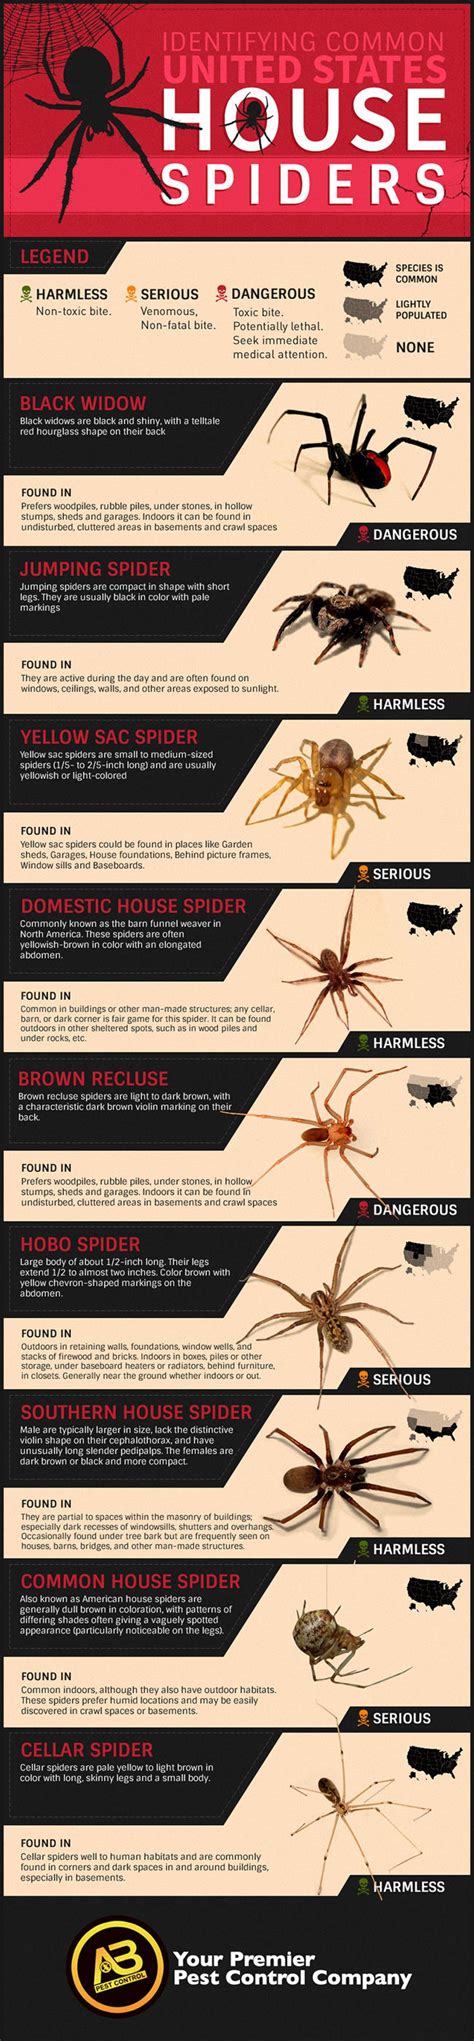 Black widow spiders are typically black with two reddish triangular people can minimize the risk of being bitten by a black widow spider by reducing clutter in basements black widow spider bites are less common and more severe than other spider bites. Identifying Common U.S. House Spiders Infographic | House ...